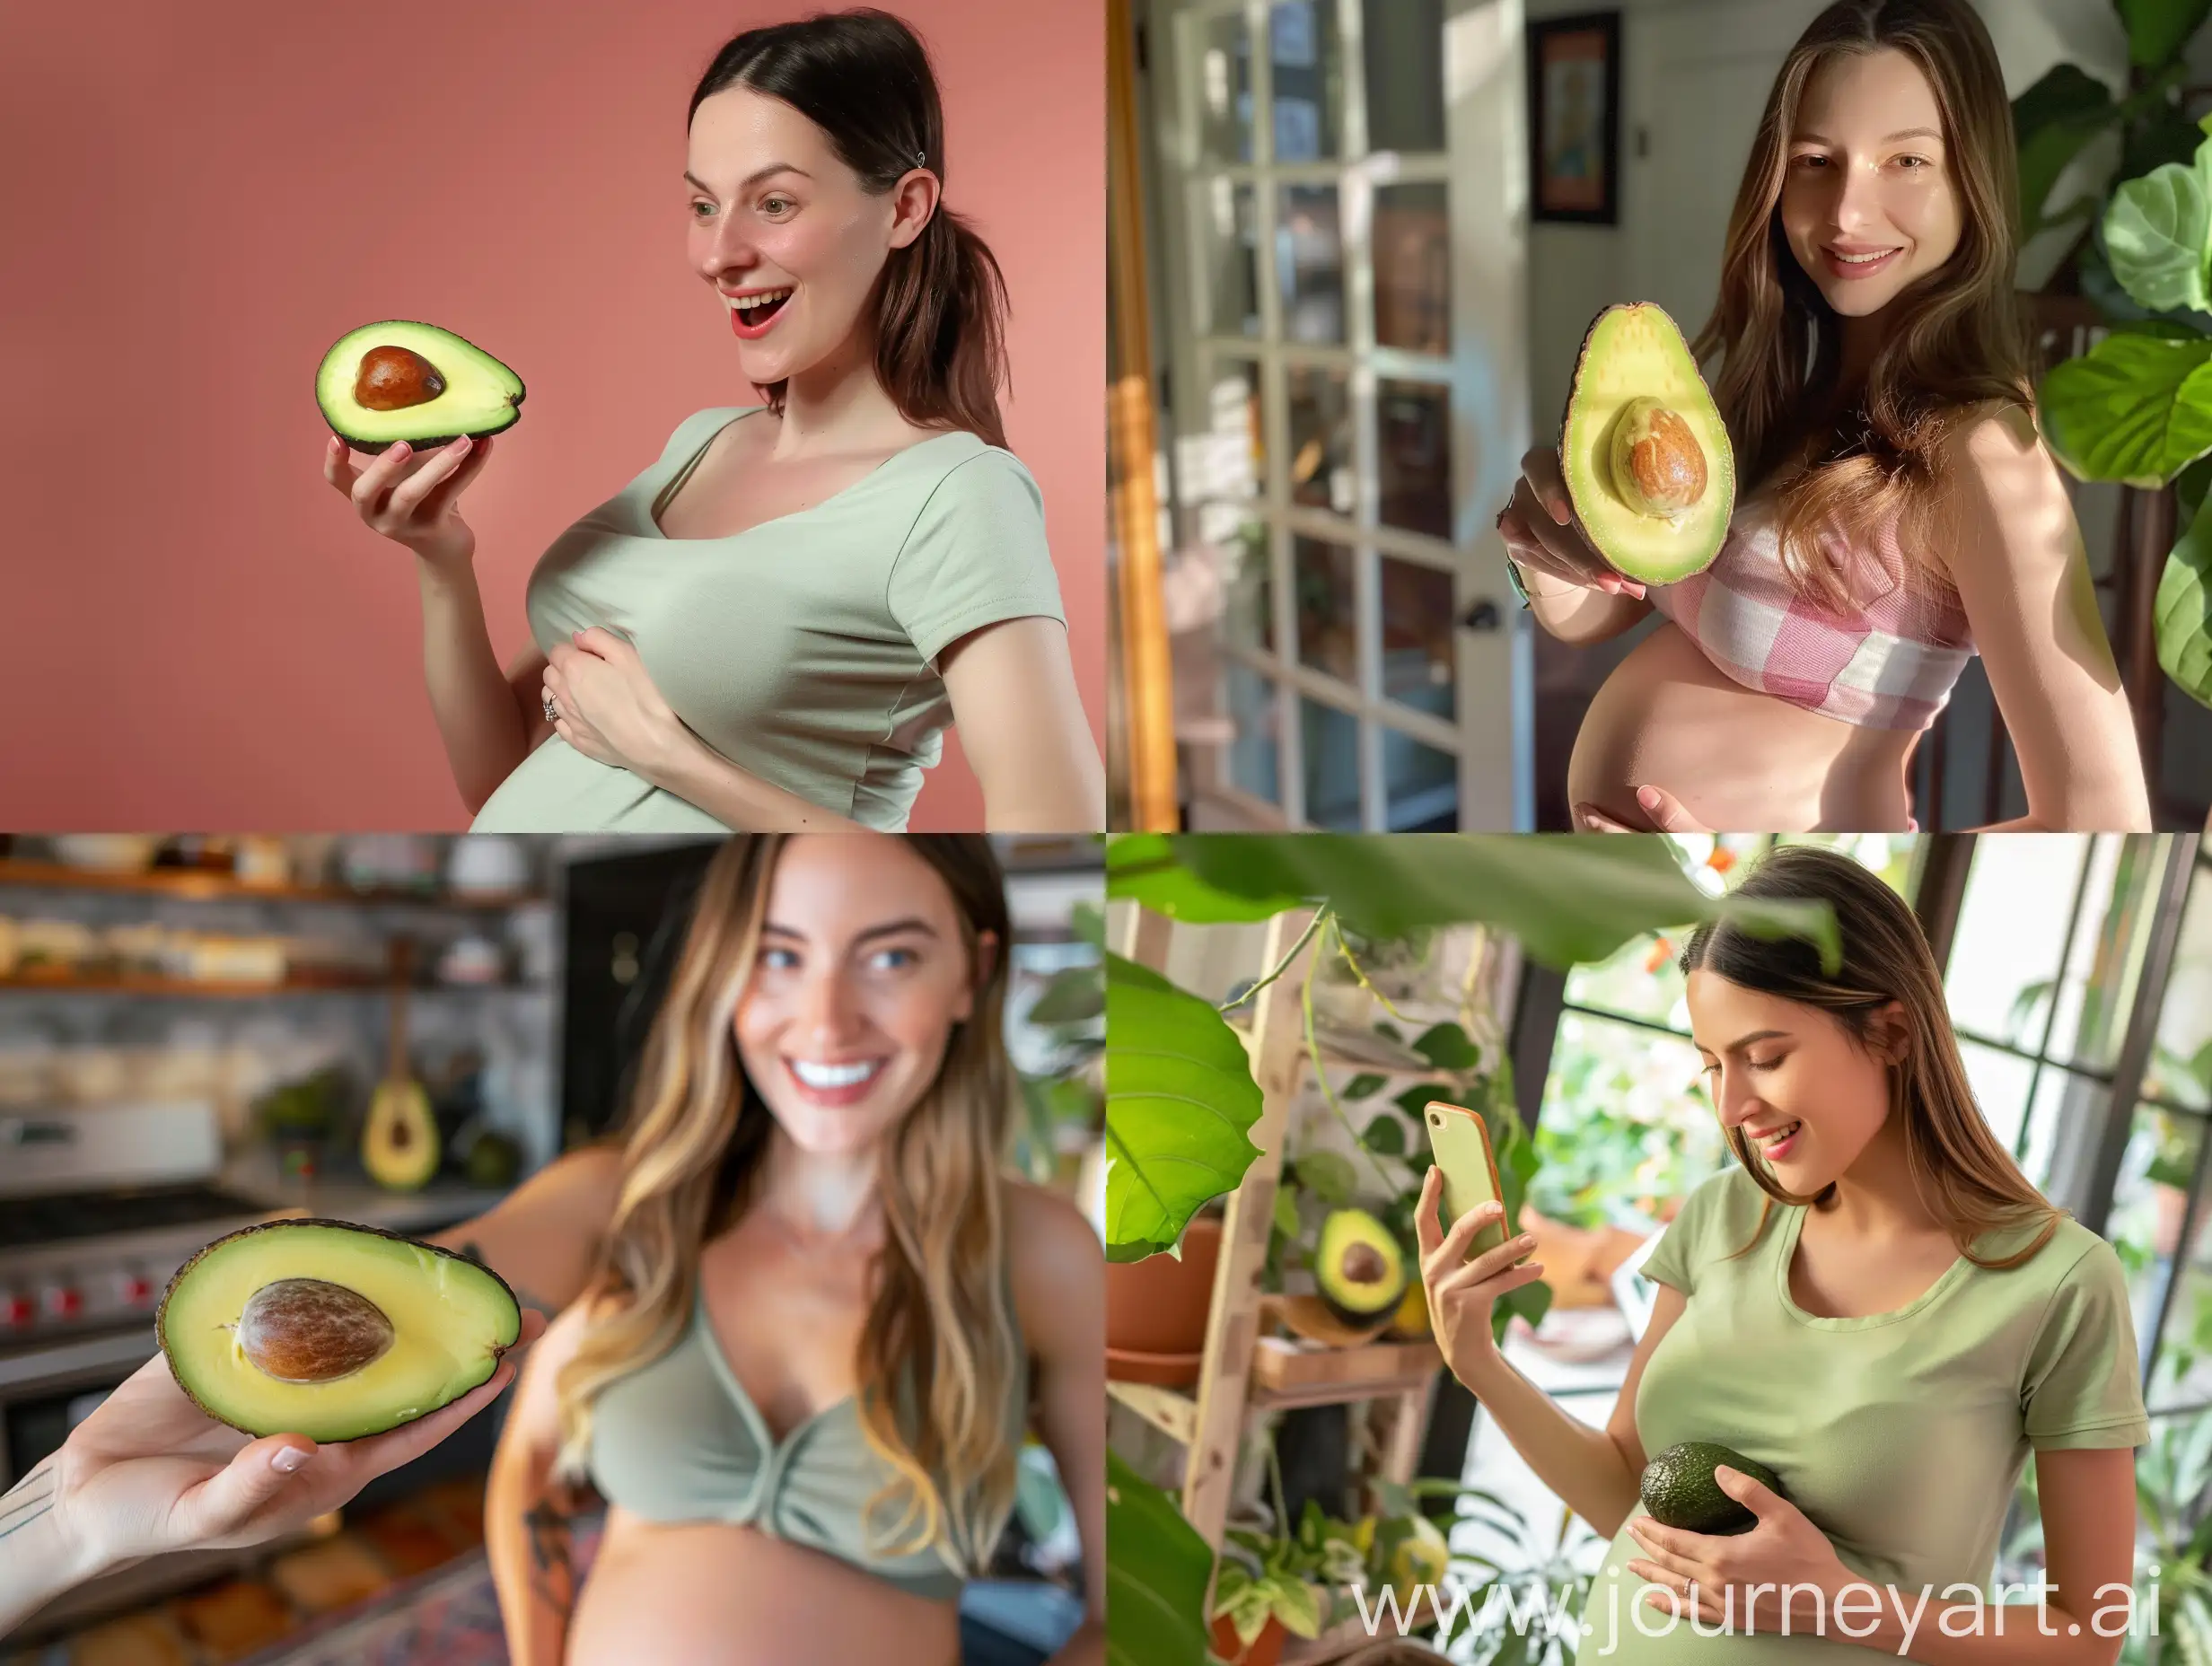 A typical Instagram selfie of a pregnant woman showing her audience an avocado. influencer